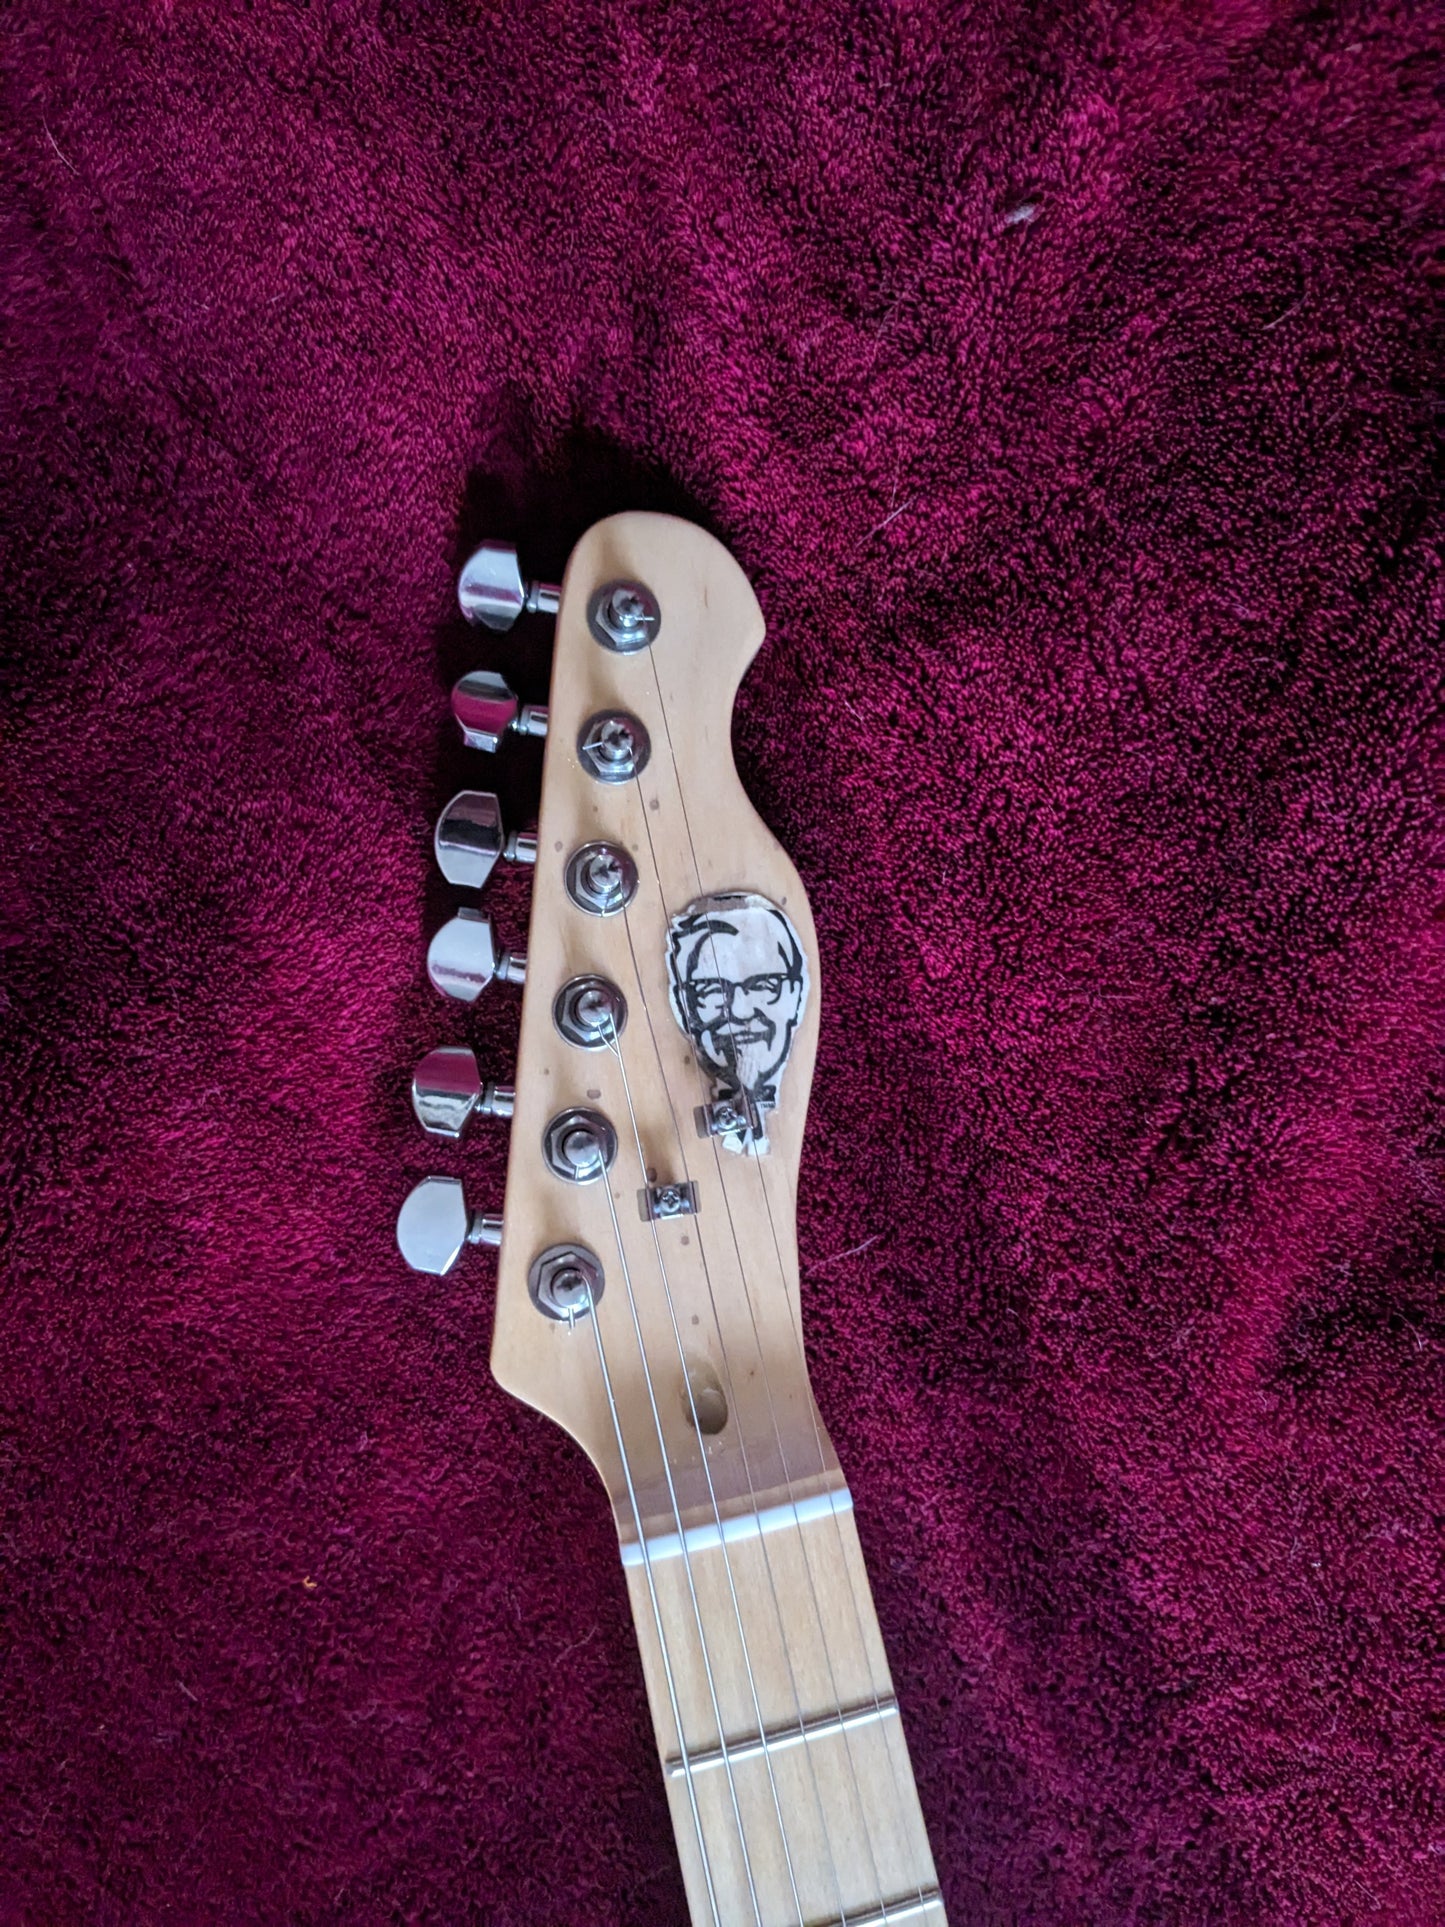 "The MotherClucker" Thinline Telecaster